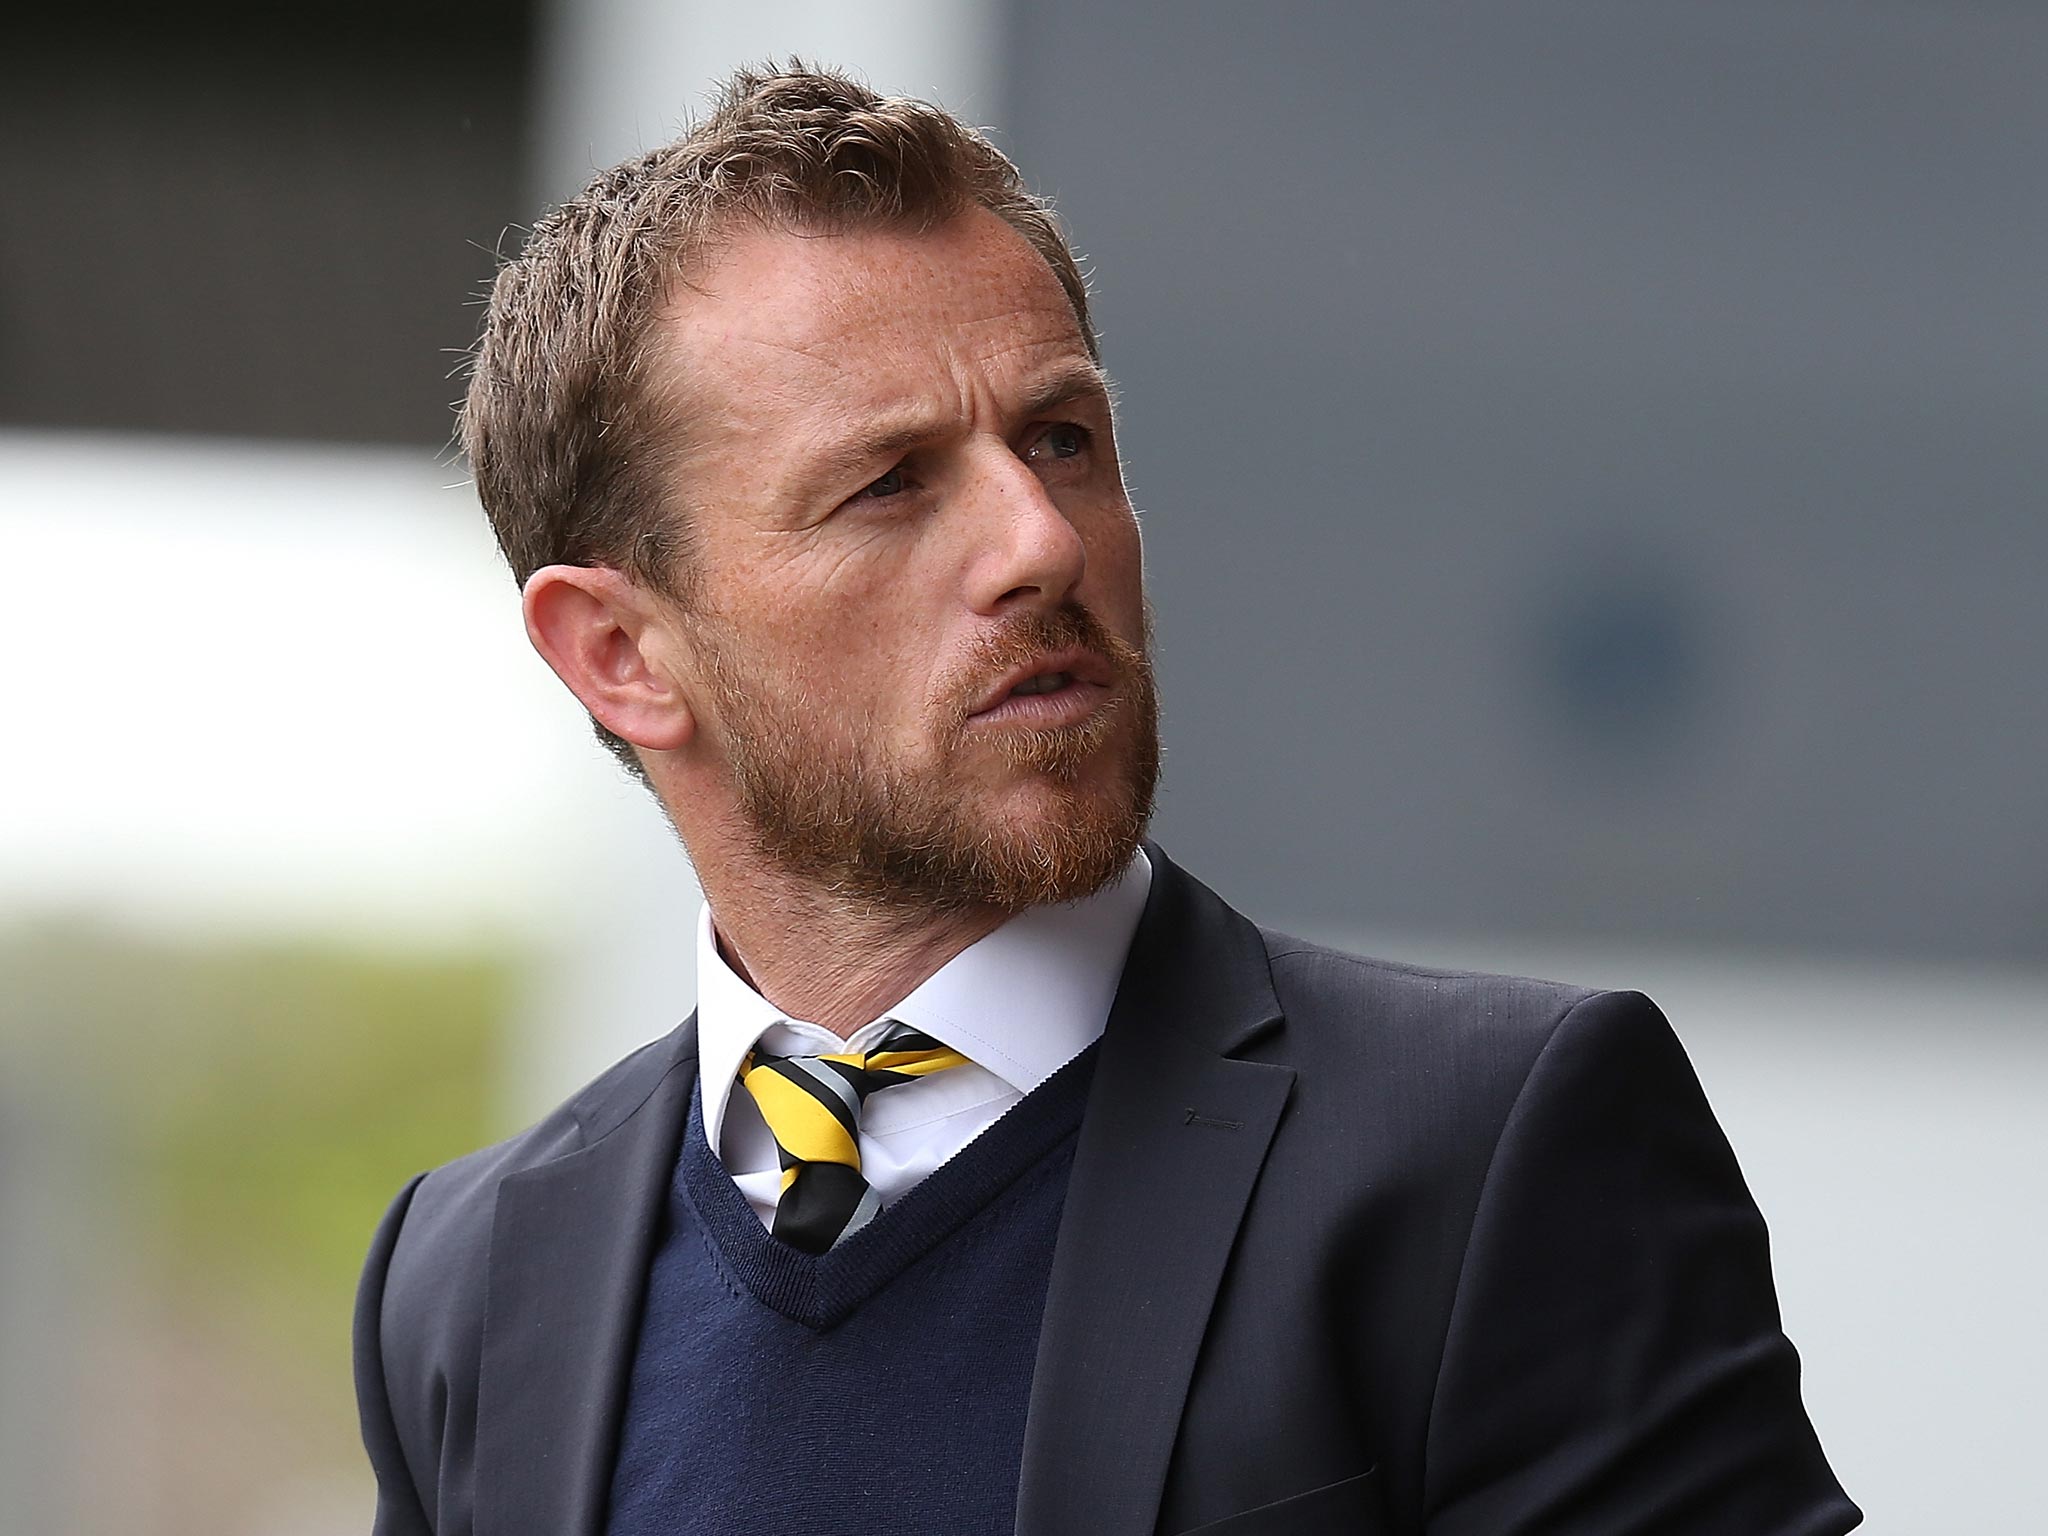 The Birmingham City manager, Gary Rowett, has banned mobile phones from the training ground